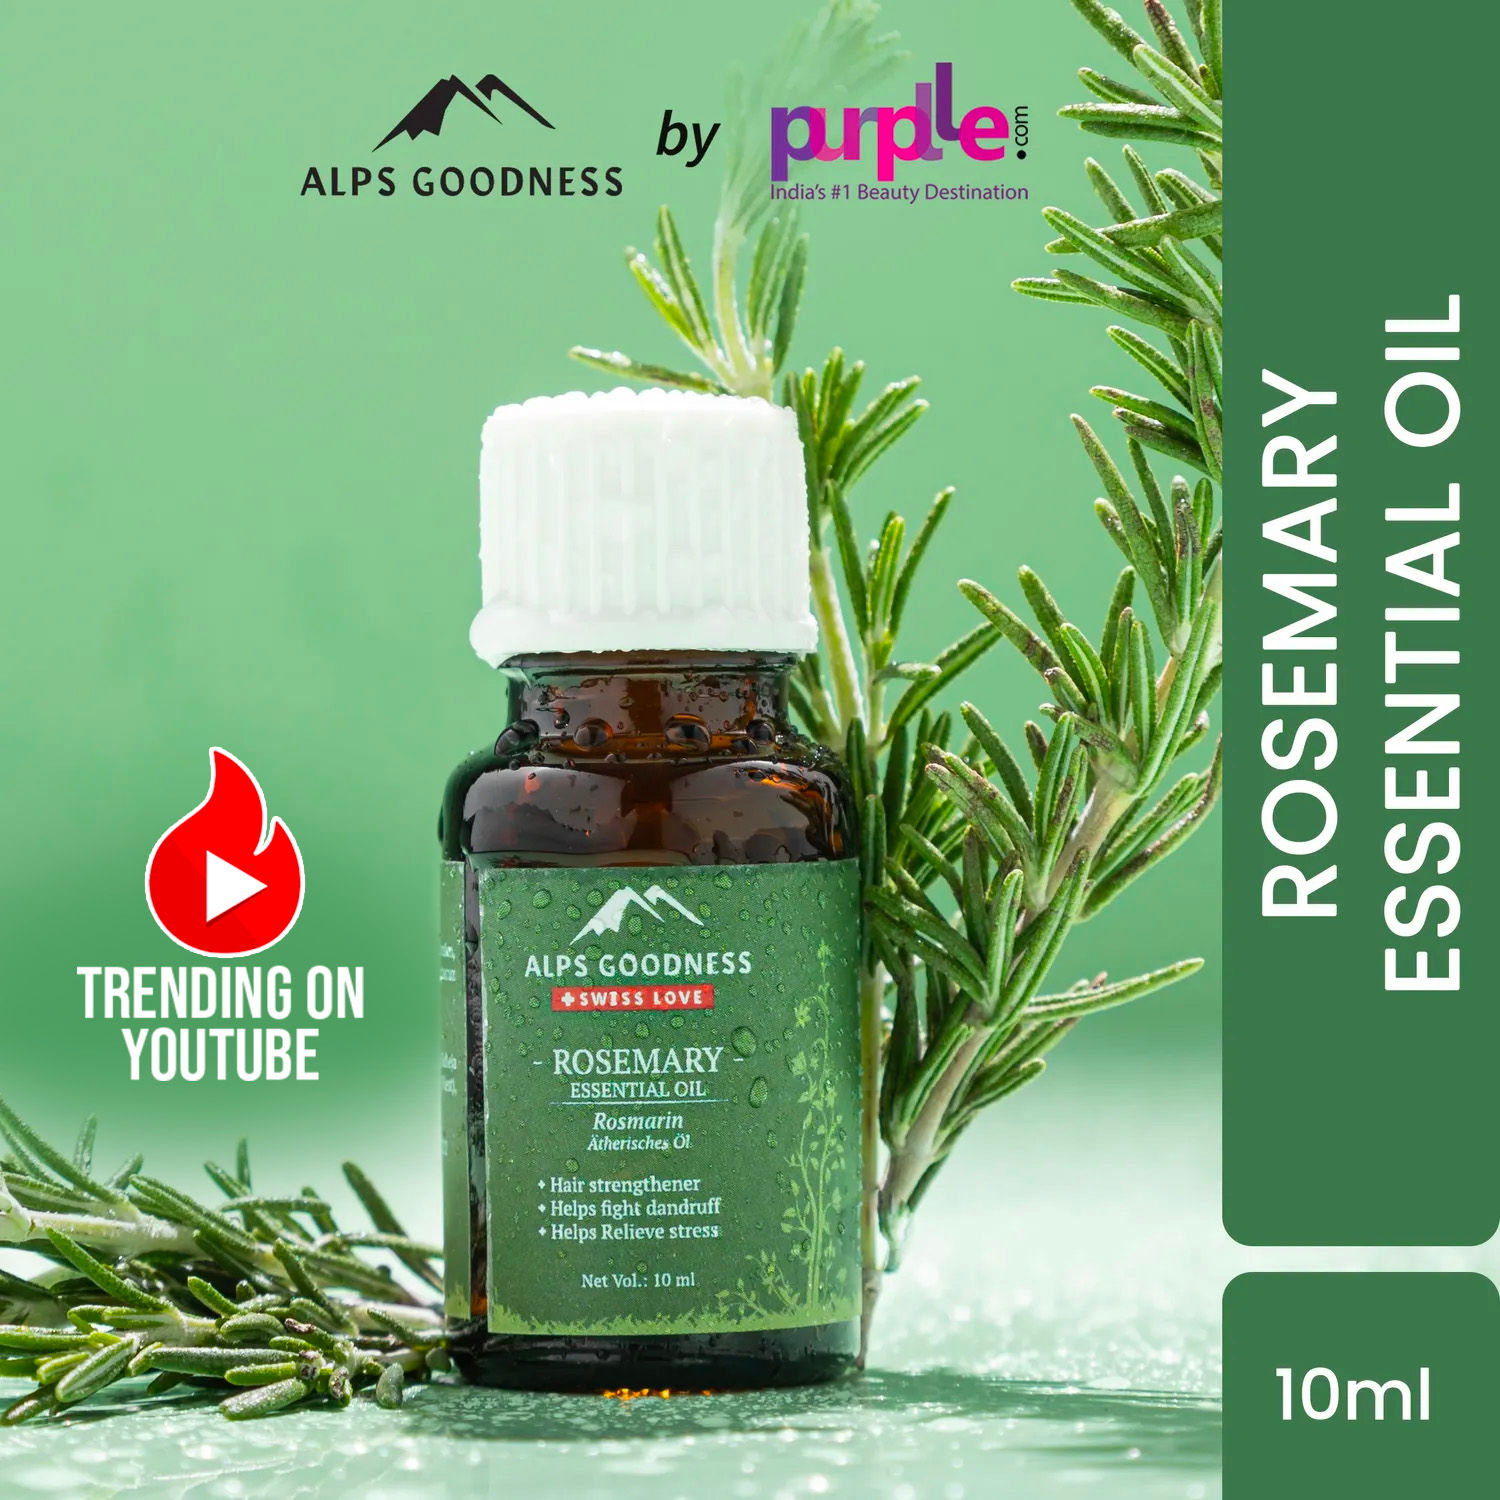 Alps Goodness Rosemary Essential Oil